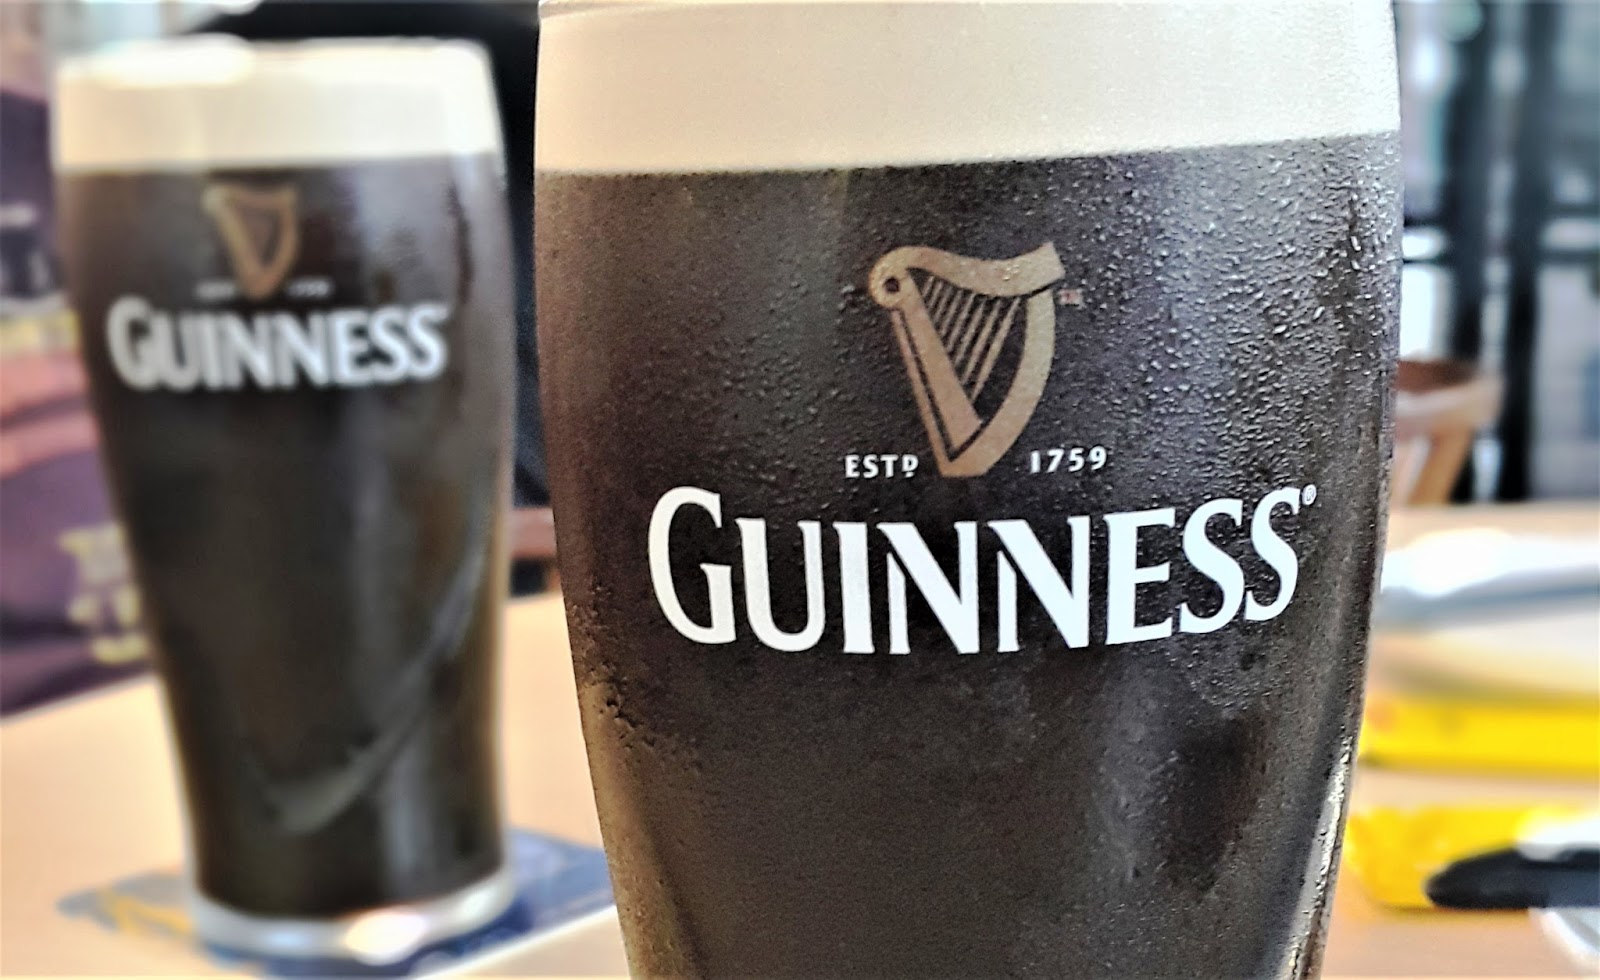 KL Beer Hunter: Guinness Draught In Cans